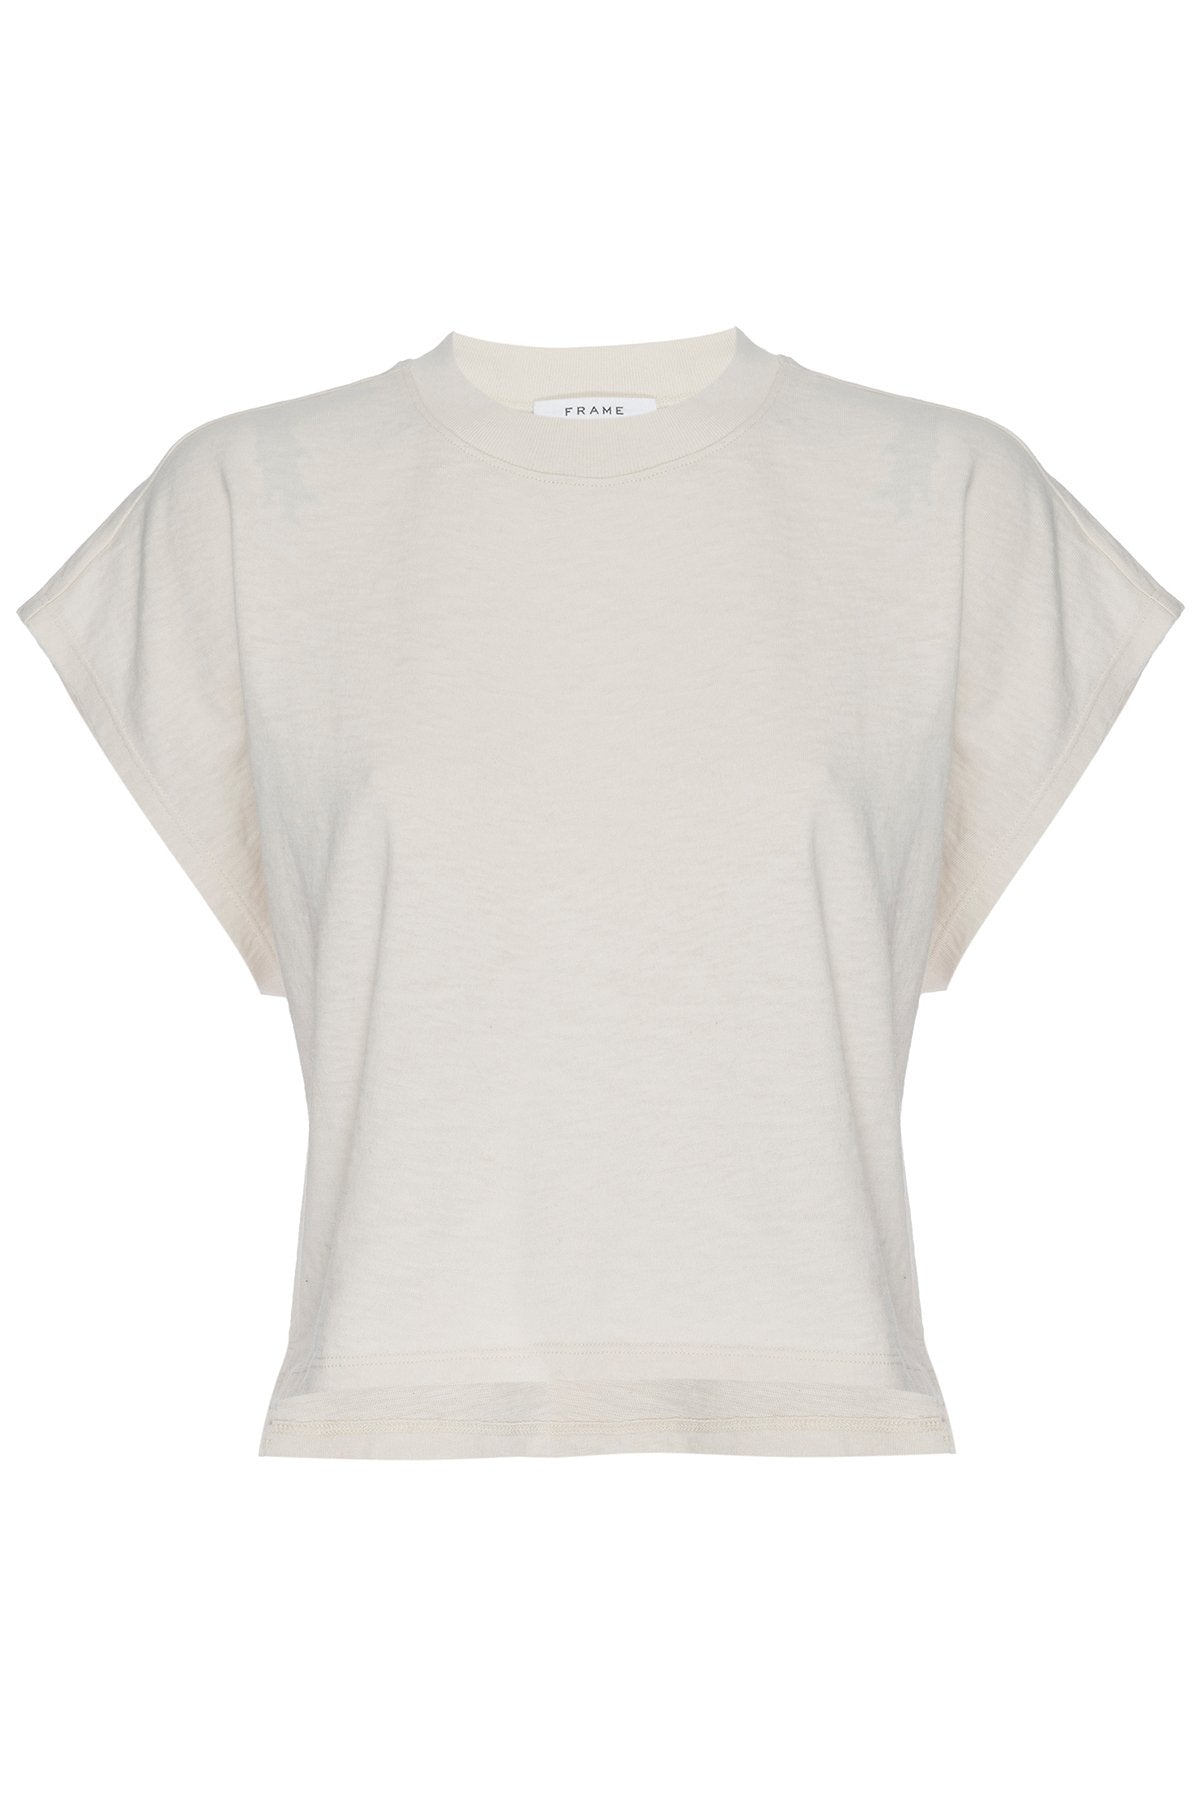 Off Duty Tee Top in Whisper White - shop-olivia.com